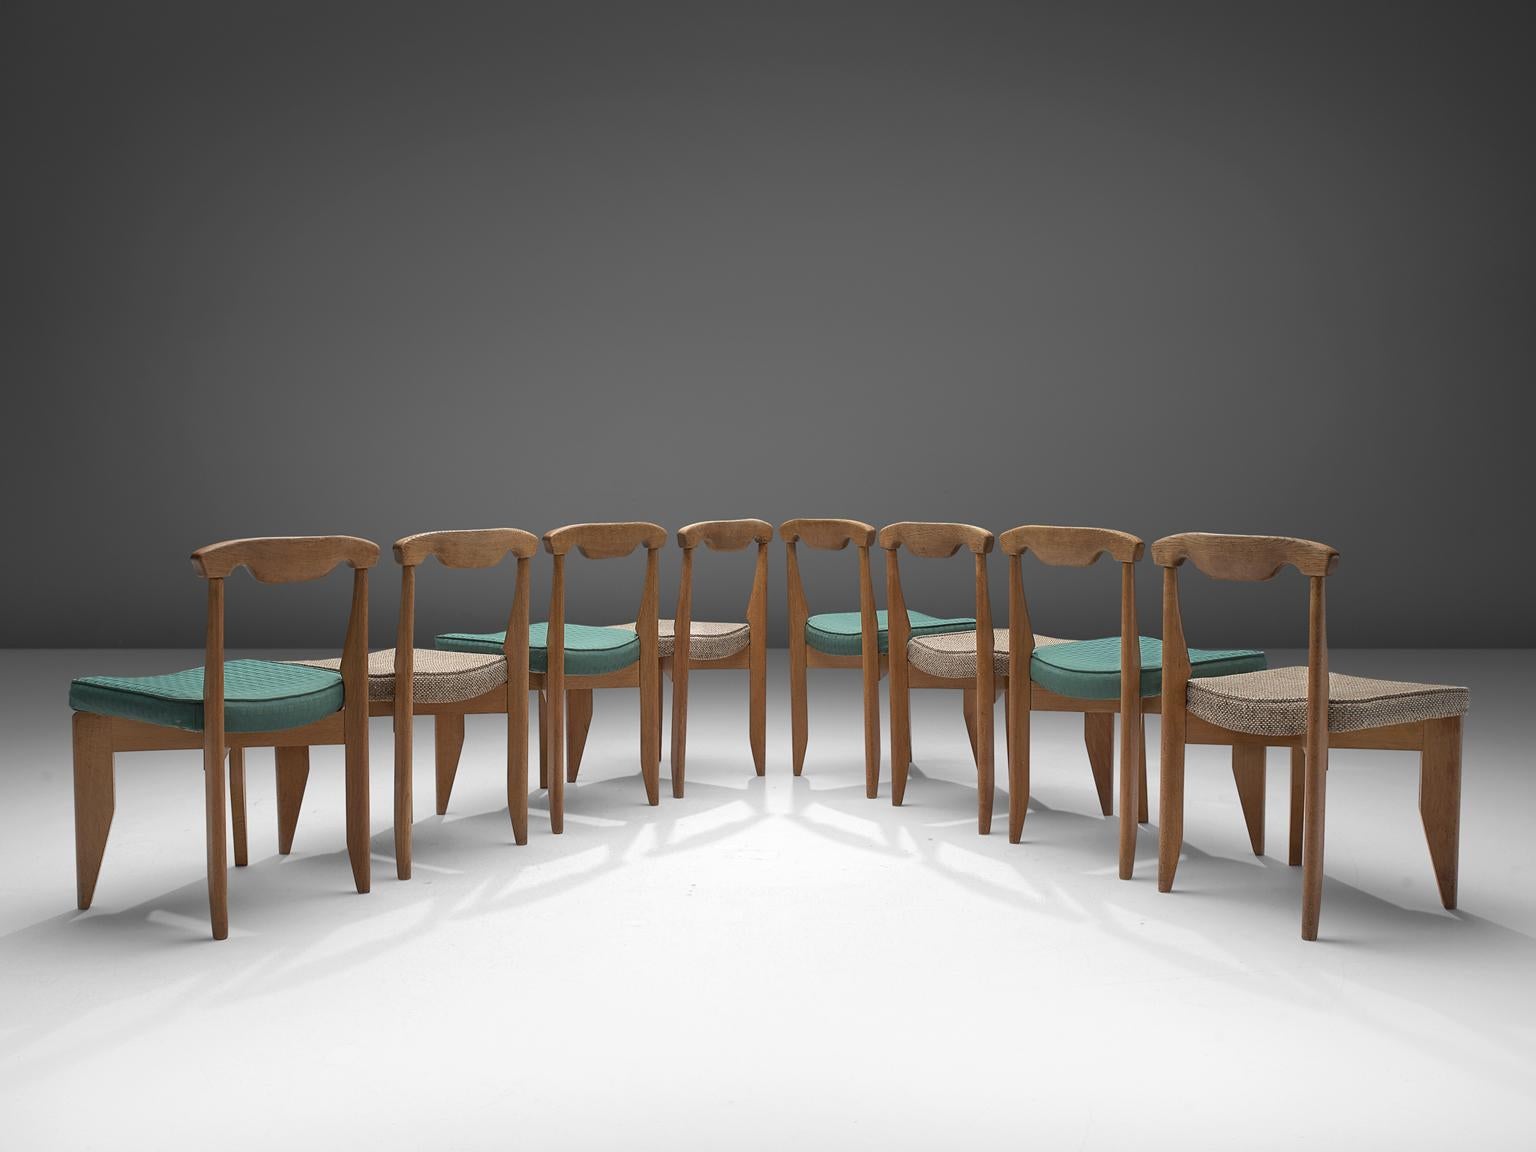 Guillerme et Chambron, set of 8 dining chairs, oak, beige and green fabric, France, 1960s

These distinctive chairs in beautifully patinated oak is by the French designer duo Jacques Chambron (1914-2001) and Robert Guillerme (1913-1990). The